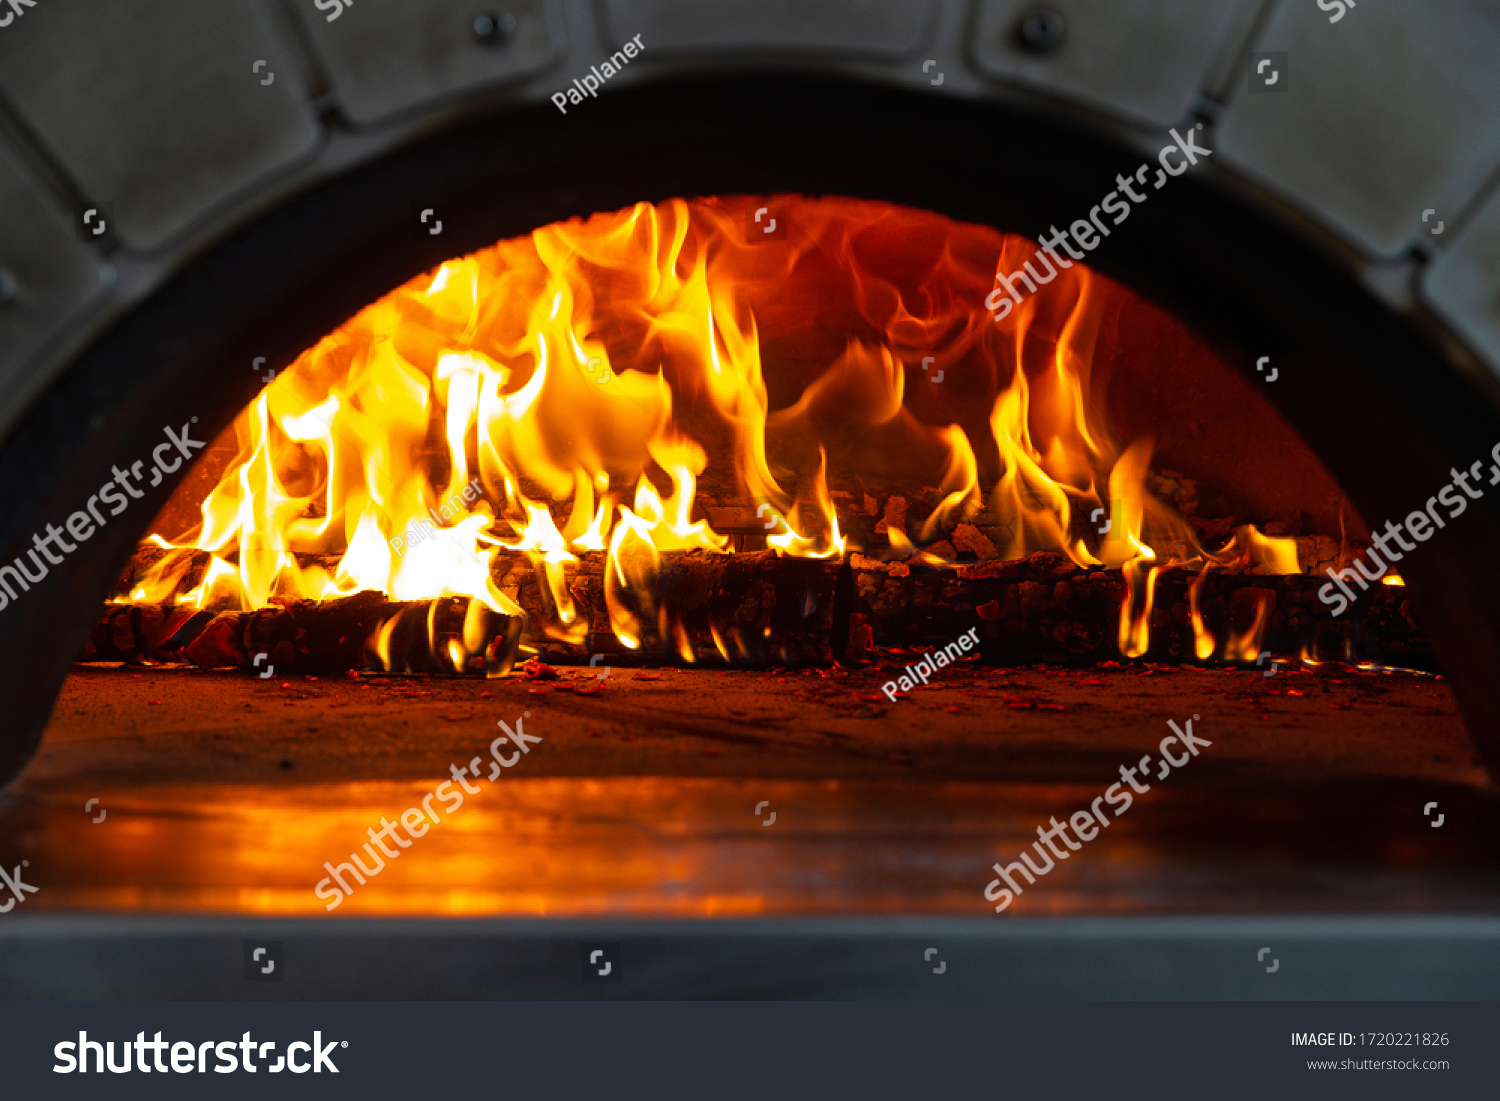 A fire is burning in a pizza oven. selective focus #1720221826